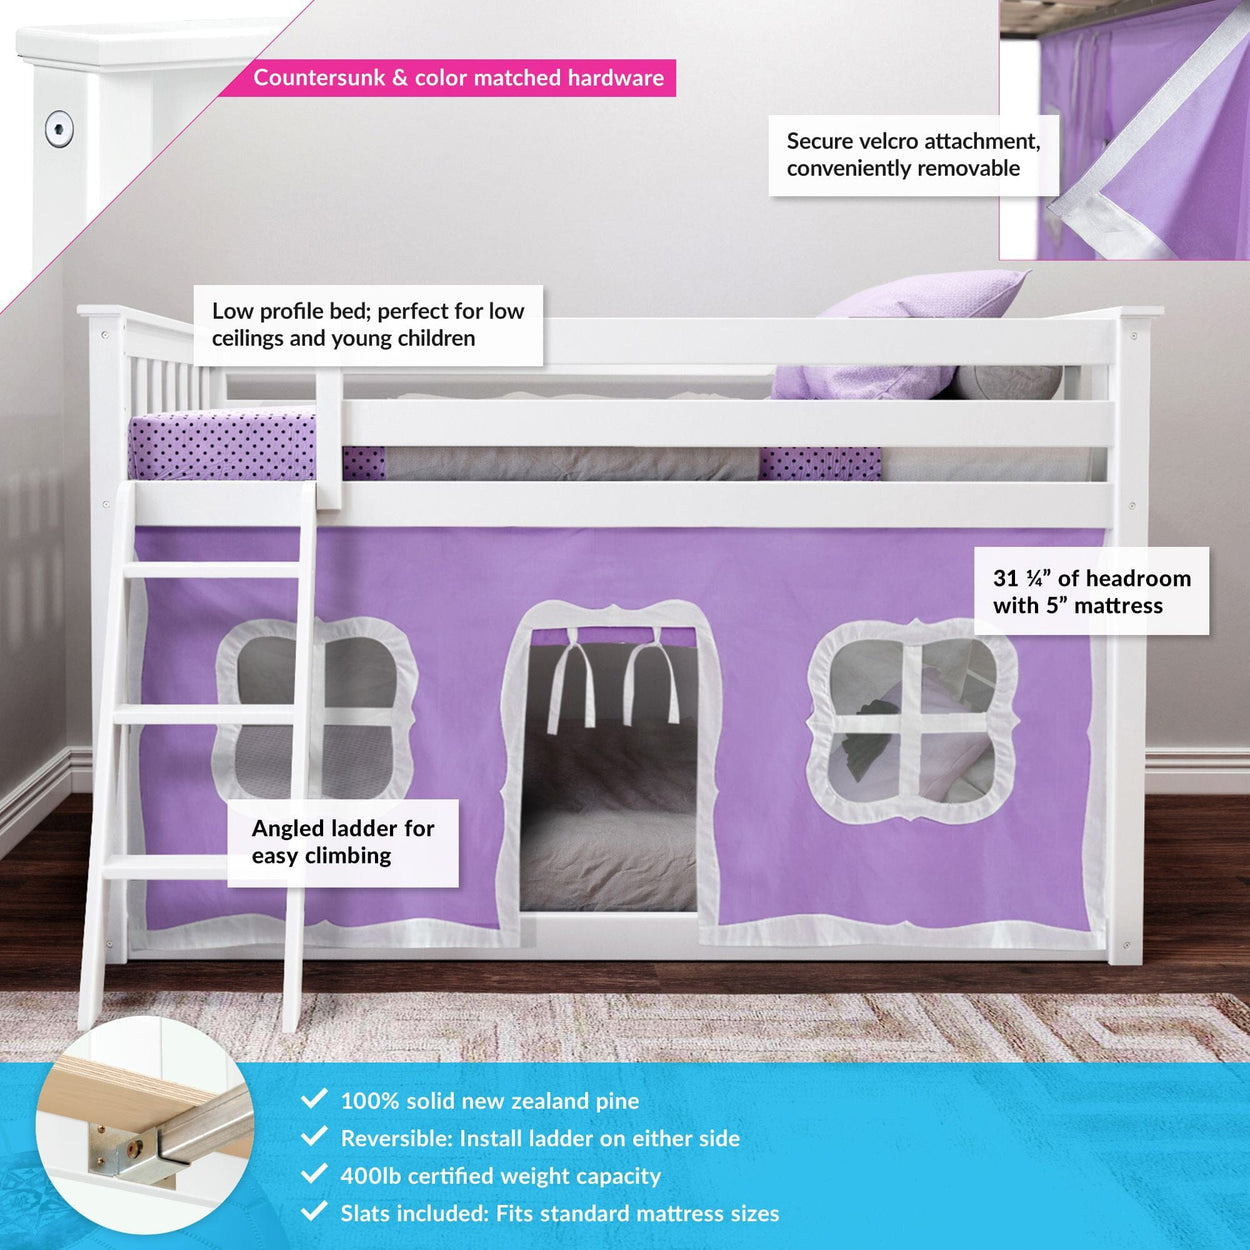 180214002061 : Bunk Beds Twin-Size Low Bunk Bed With Curtain, White + Purple Curtain